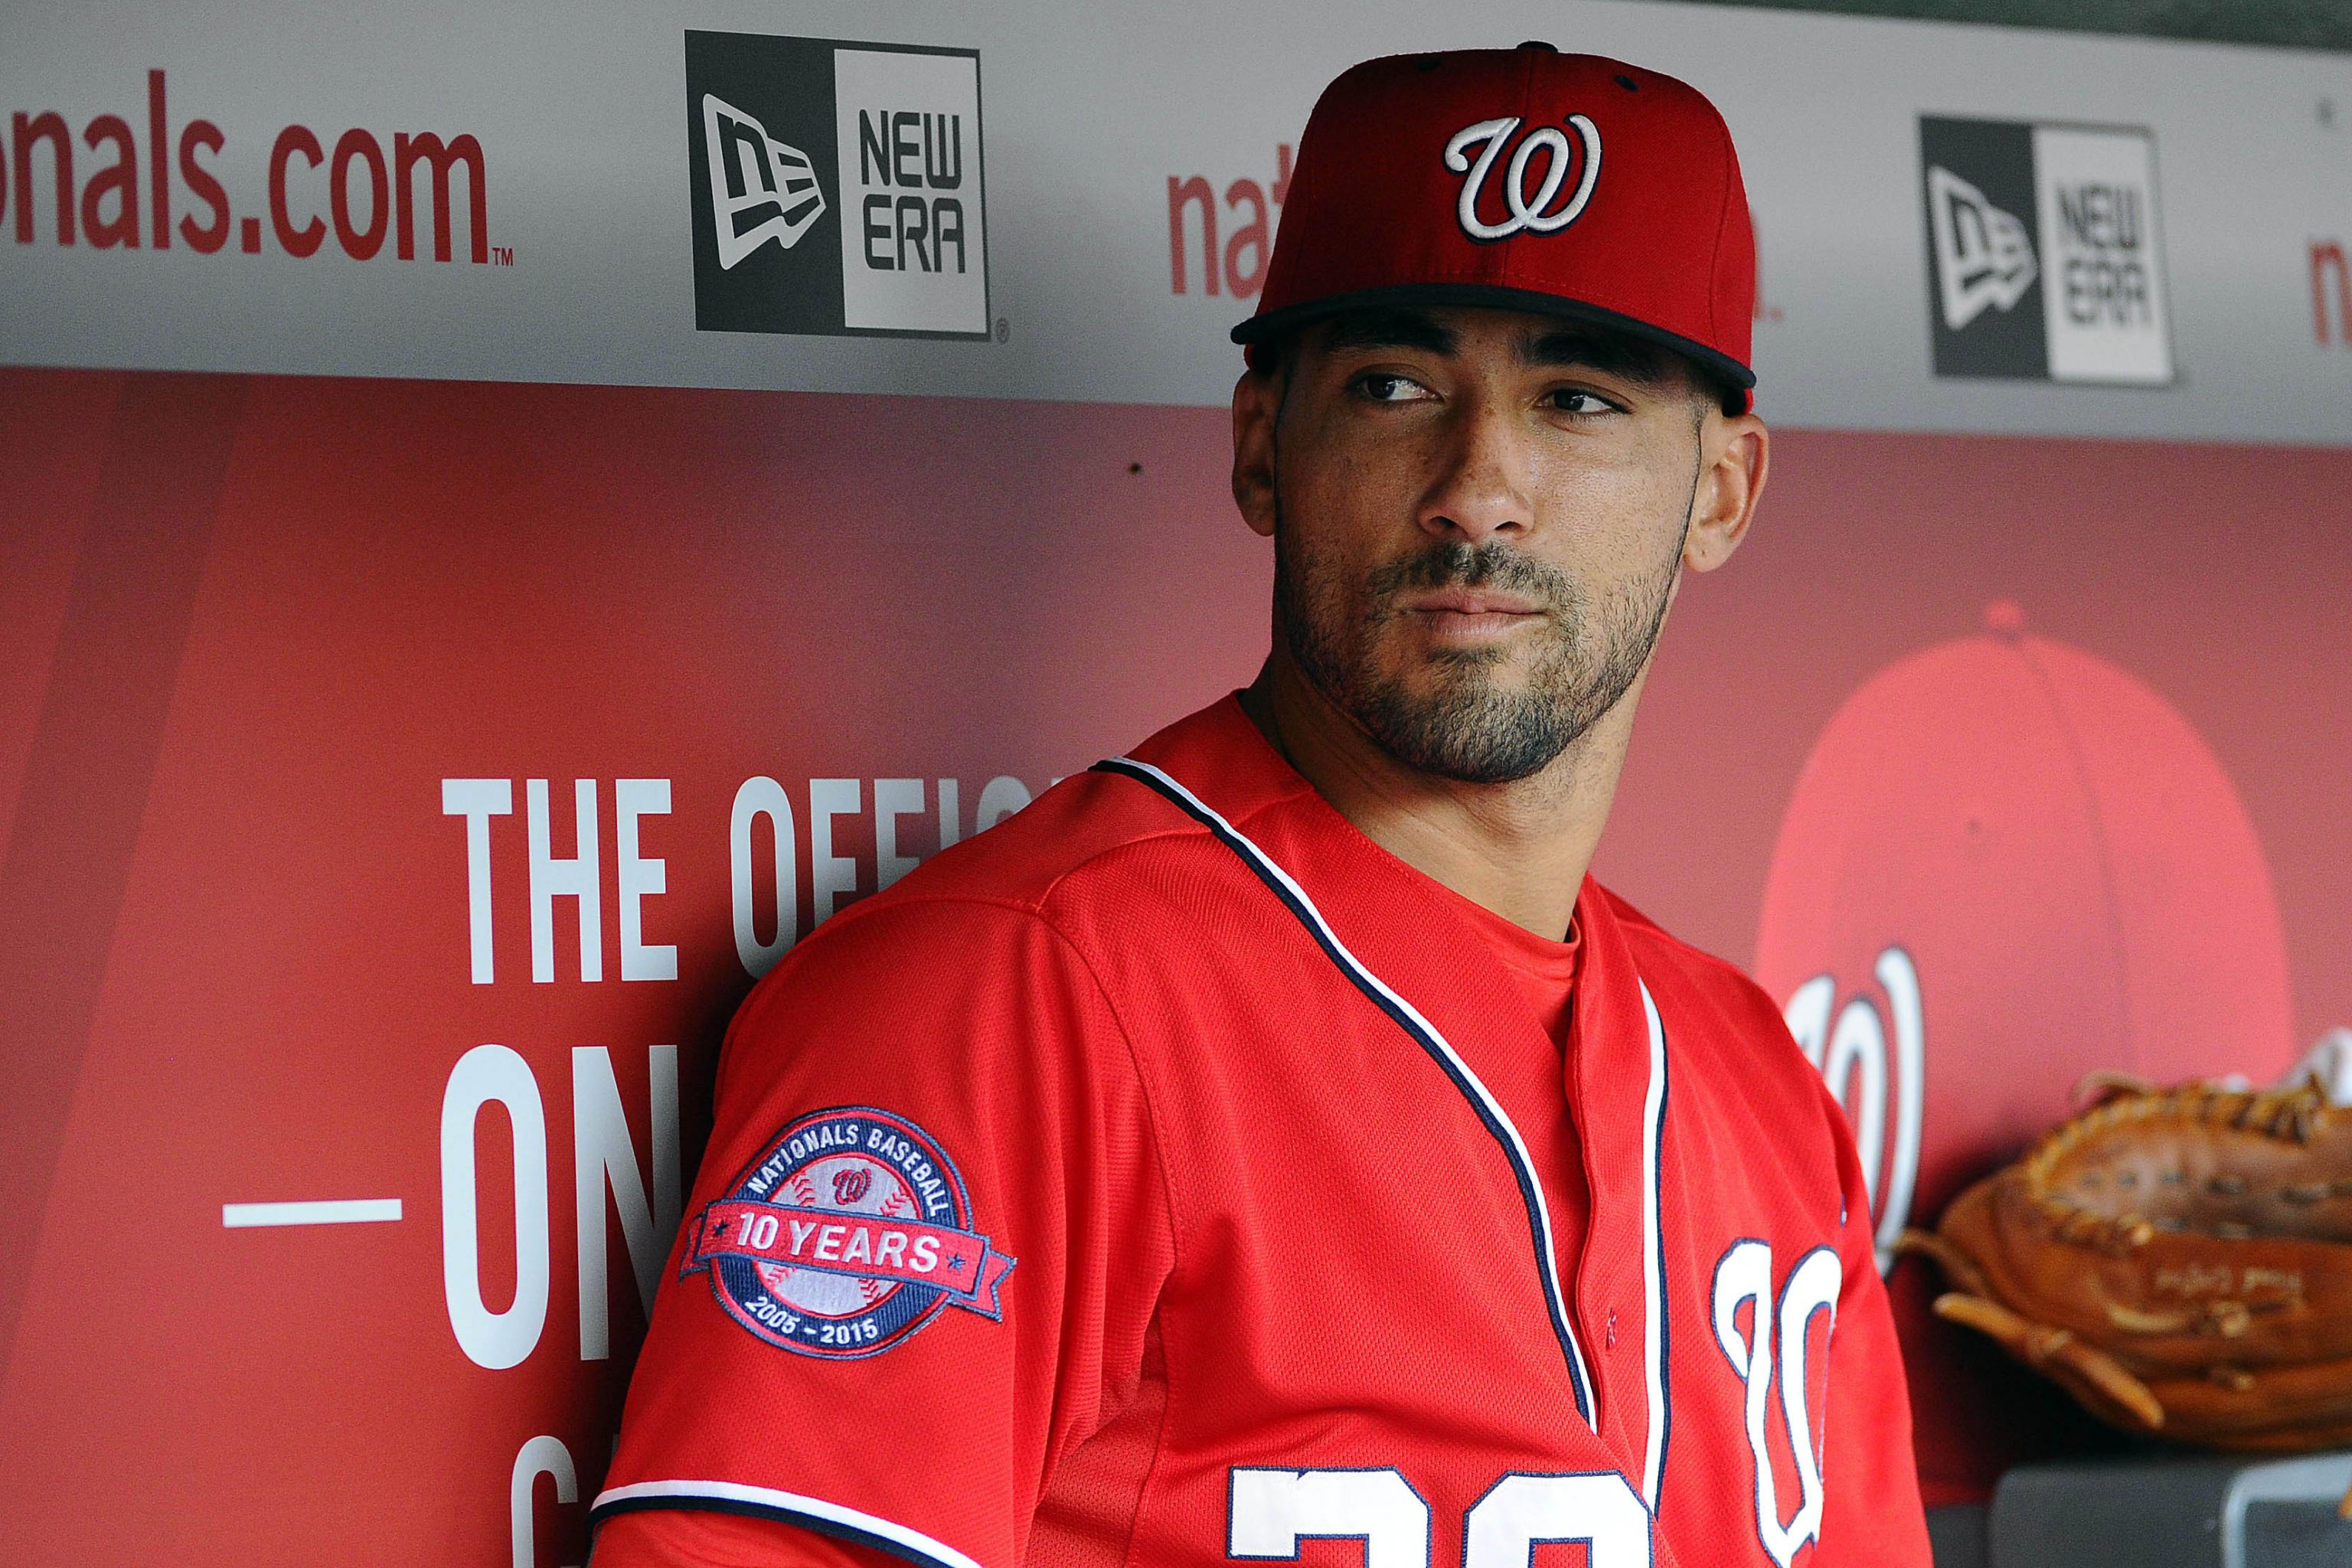 BSN Exclusive: How Ian Desmond honors a lost franchise